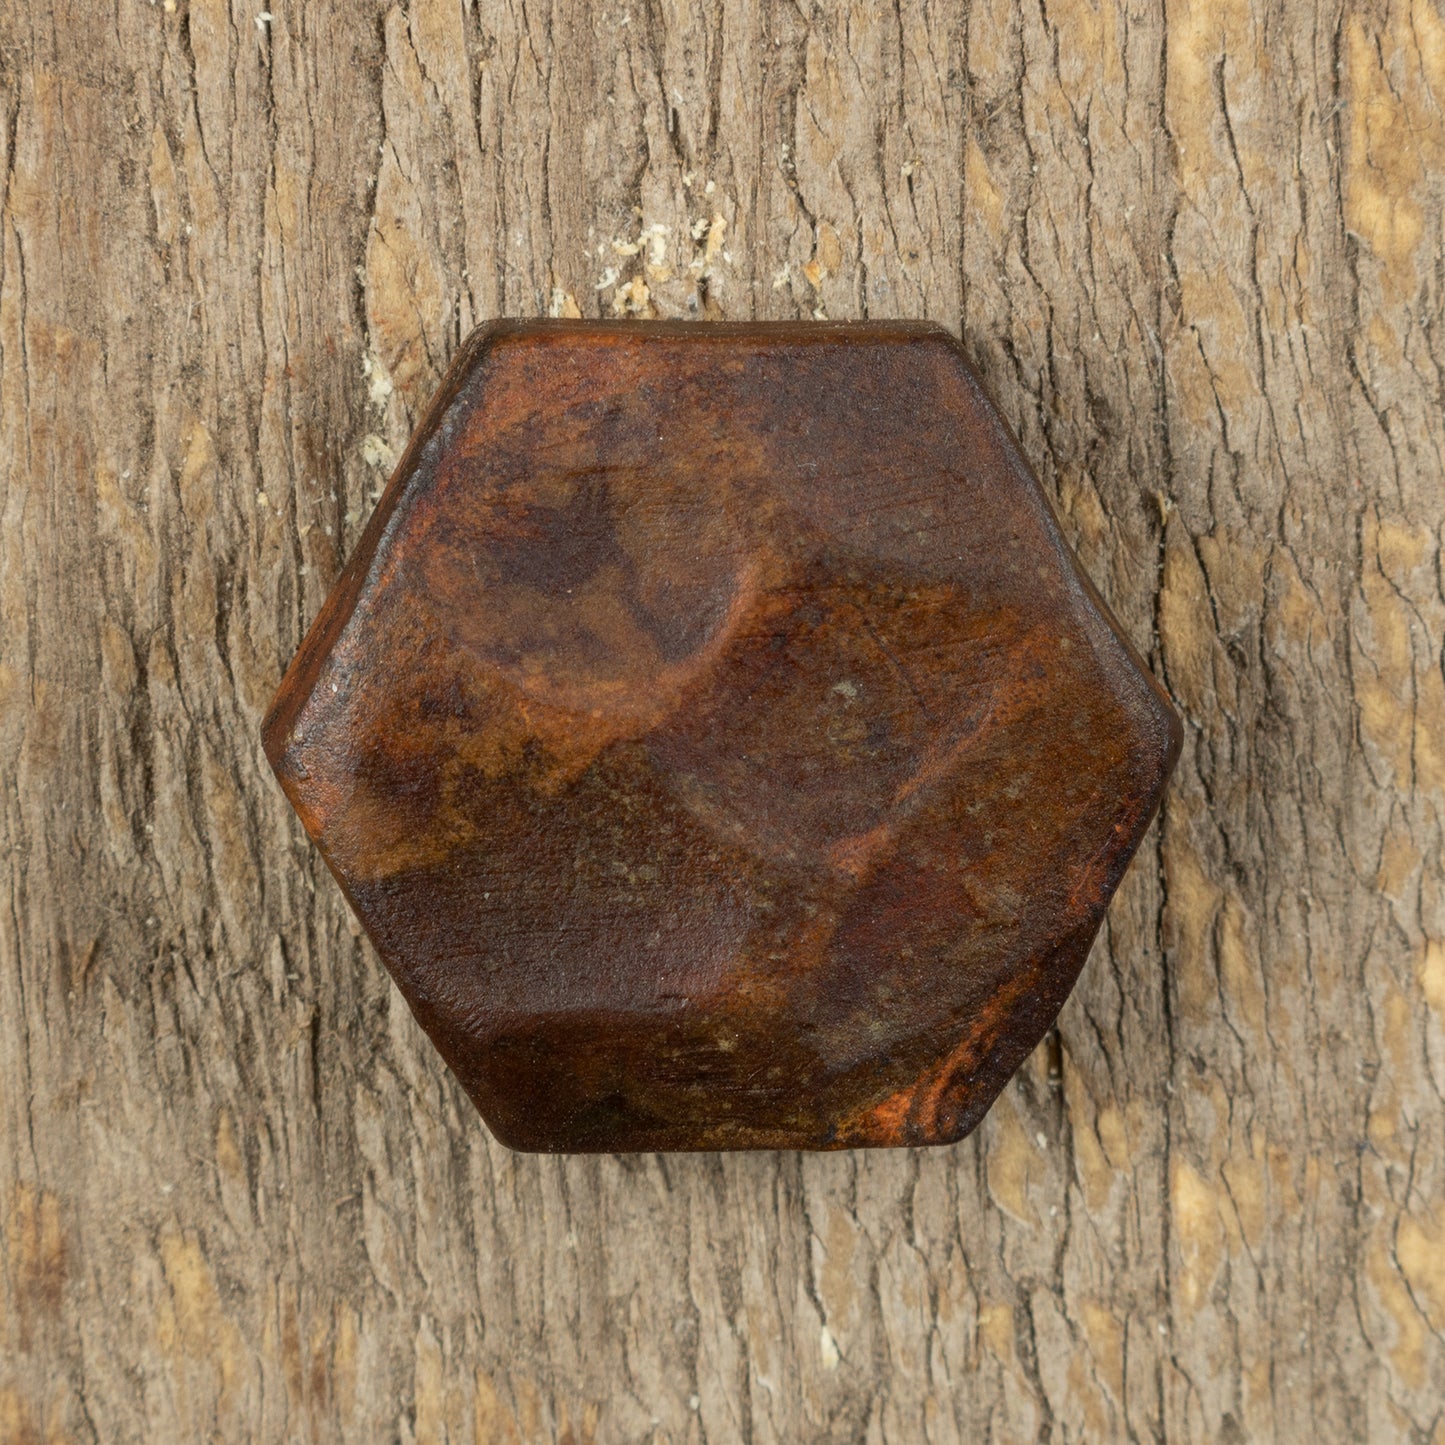 Load image into Gallery viewer, 1/2&amp;quot; Dia. Hammered Hex Head Bolt
